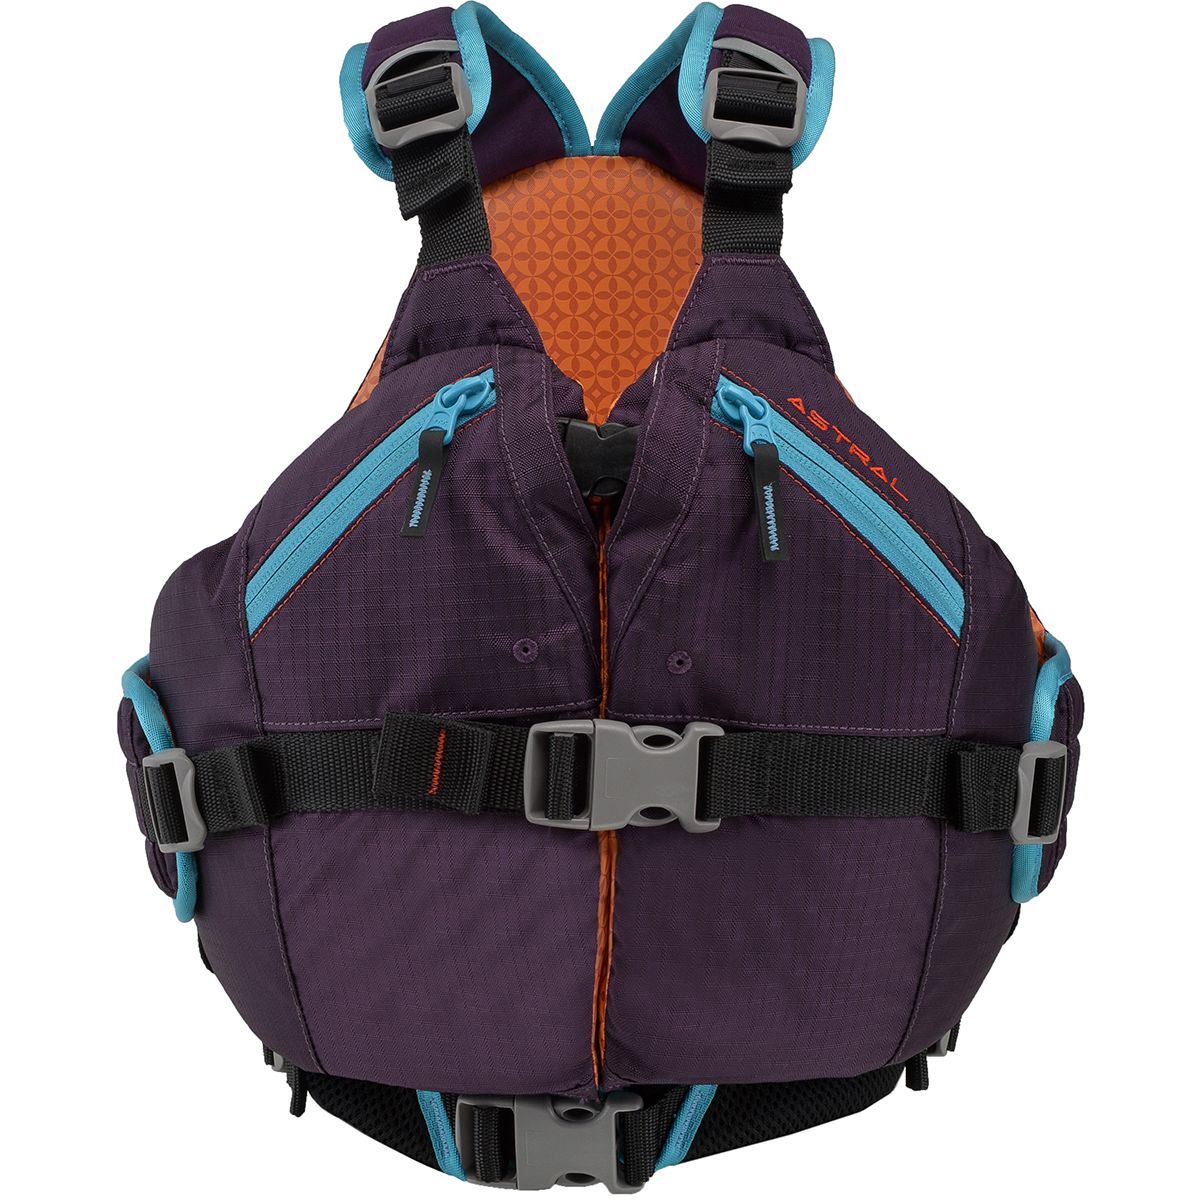 Astral Otter 2.0 Personal Flotation Device - Kids'